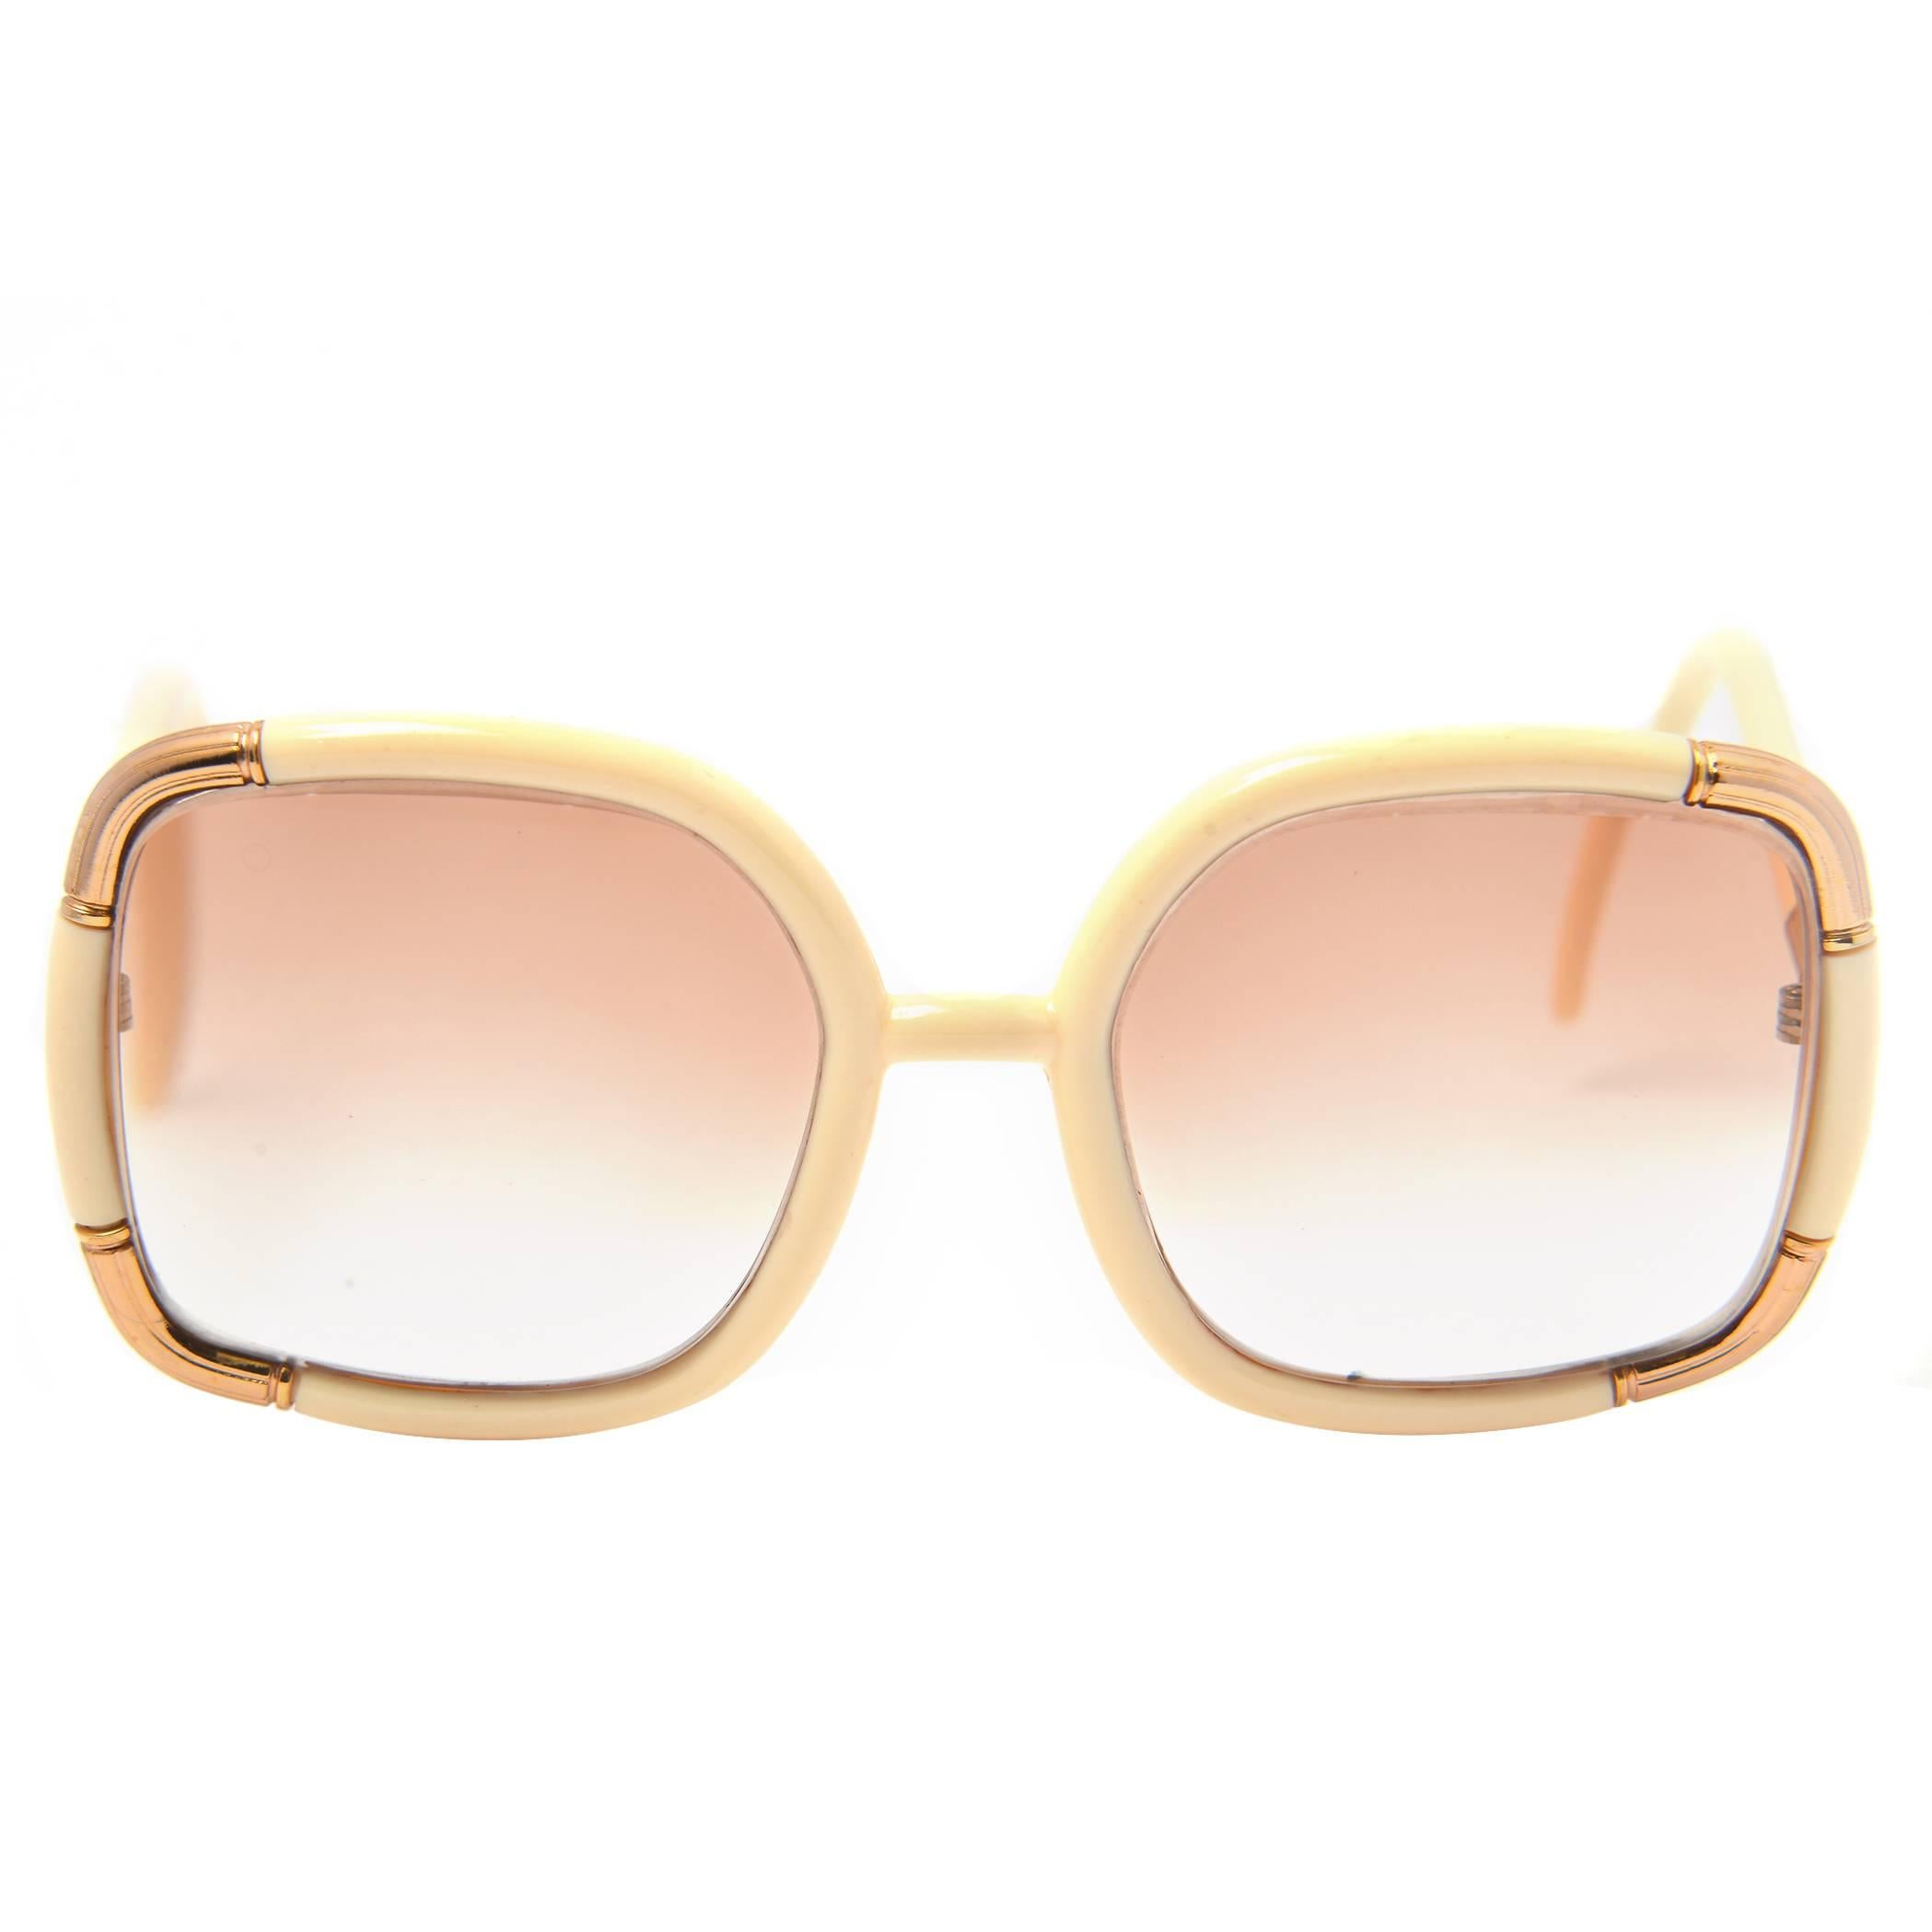 1970s Ted Lapidus Paris White and Gold Framed Sunglasses 